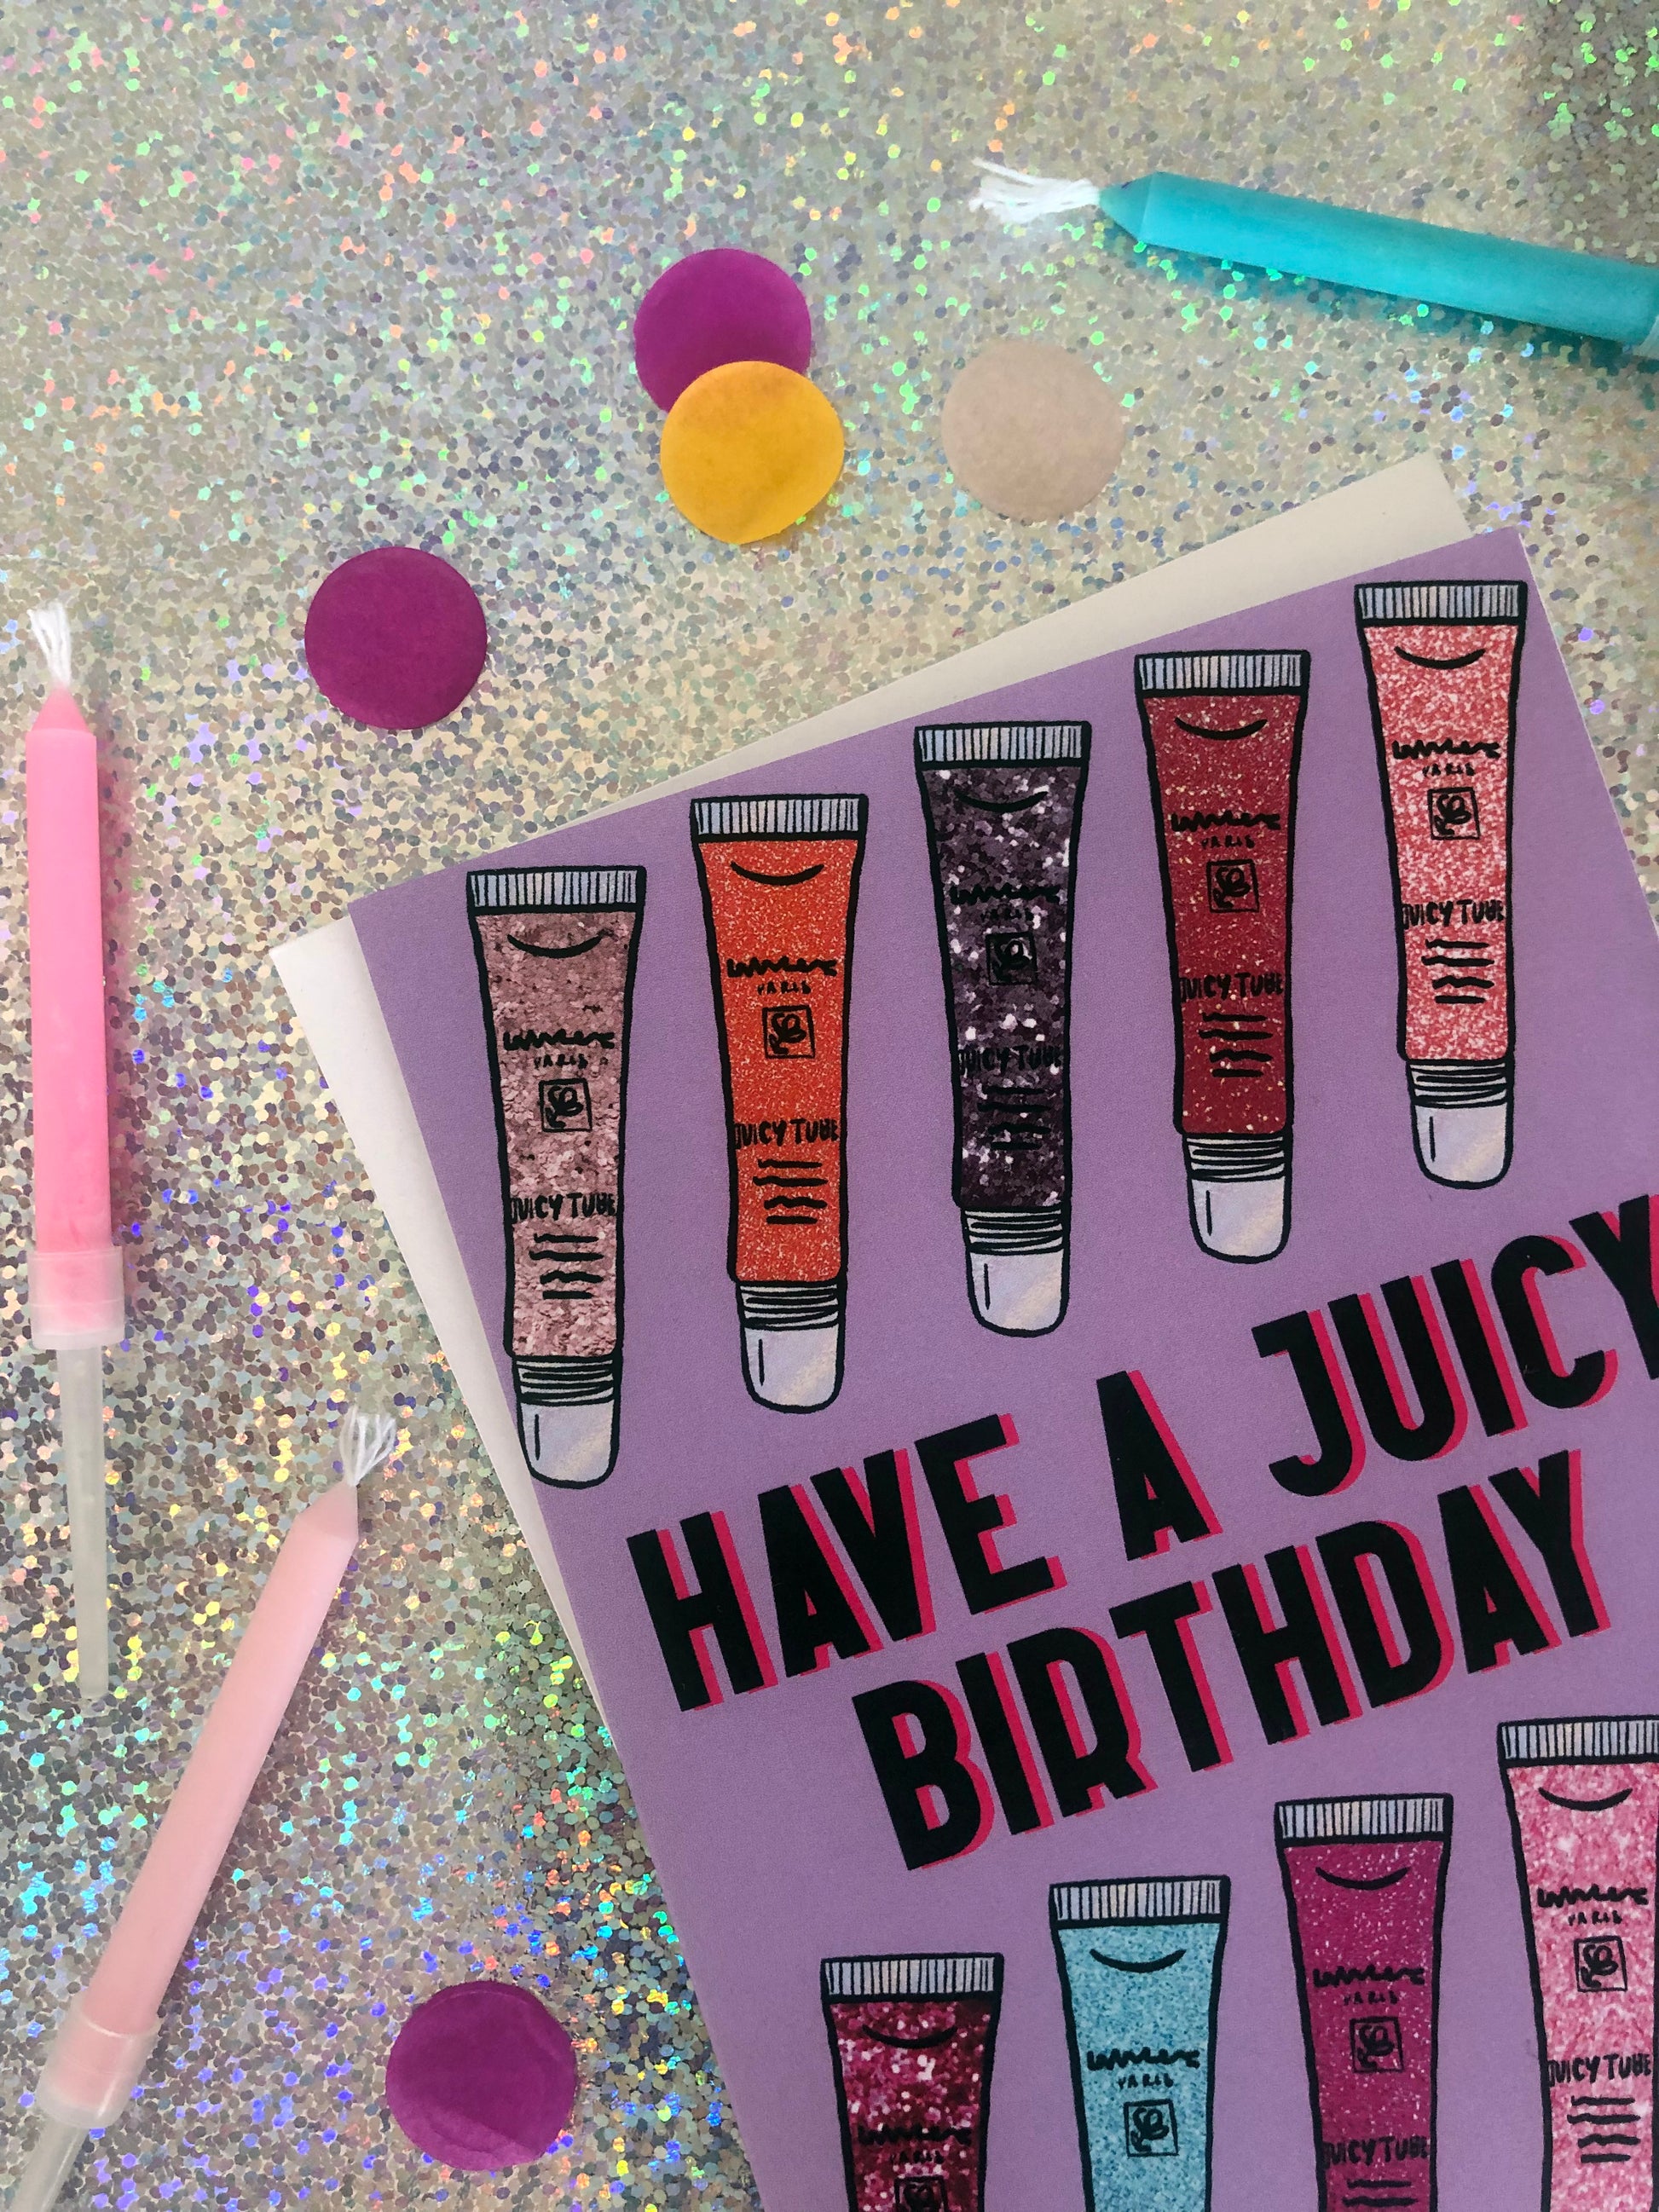 Lilac Birthday Card featuring an illustration of noughties cult beauty product juicy tubes lip gloss and the message 'have a juicy birthday'